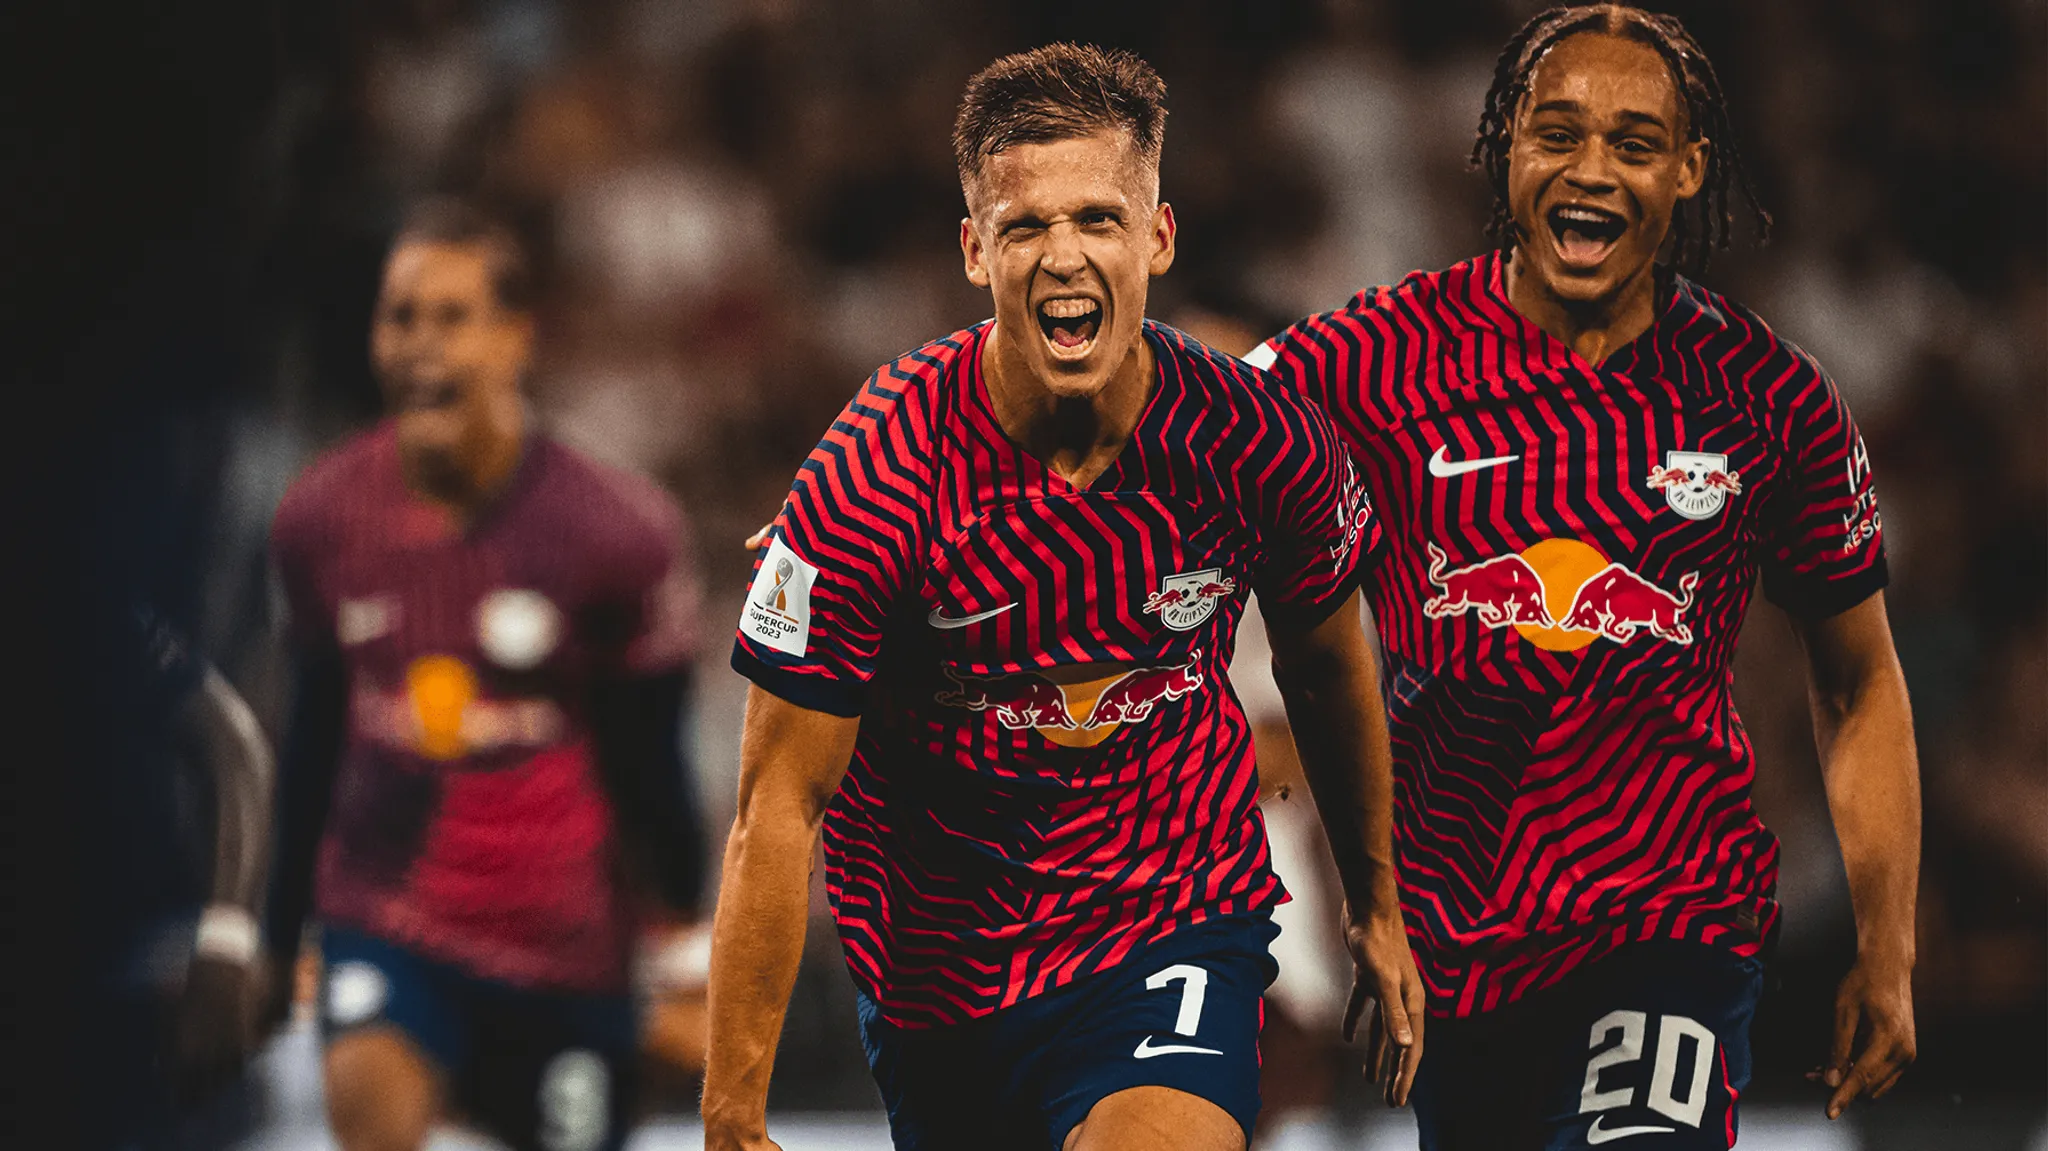 Dani Olmo celebrates scoring the first of his three goals against FC Bayern in the Supercup.